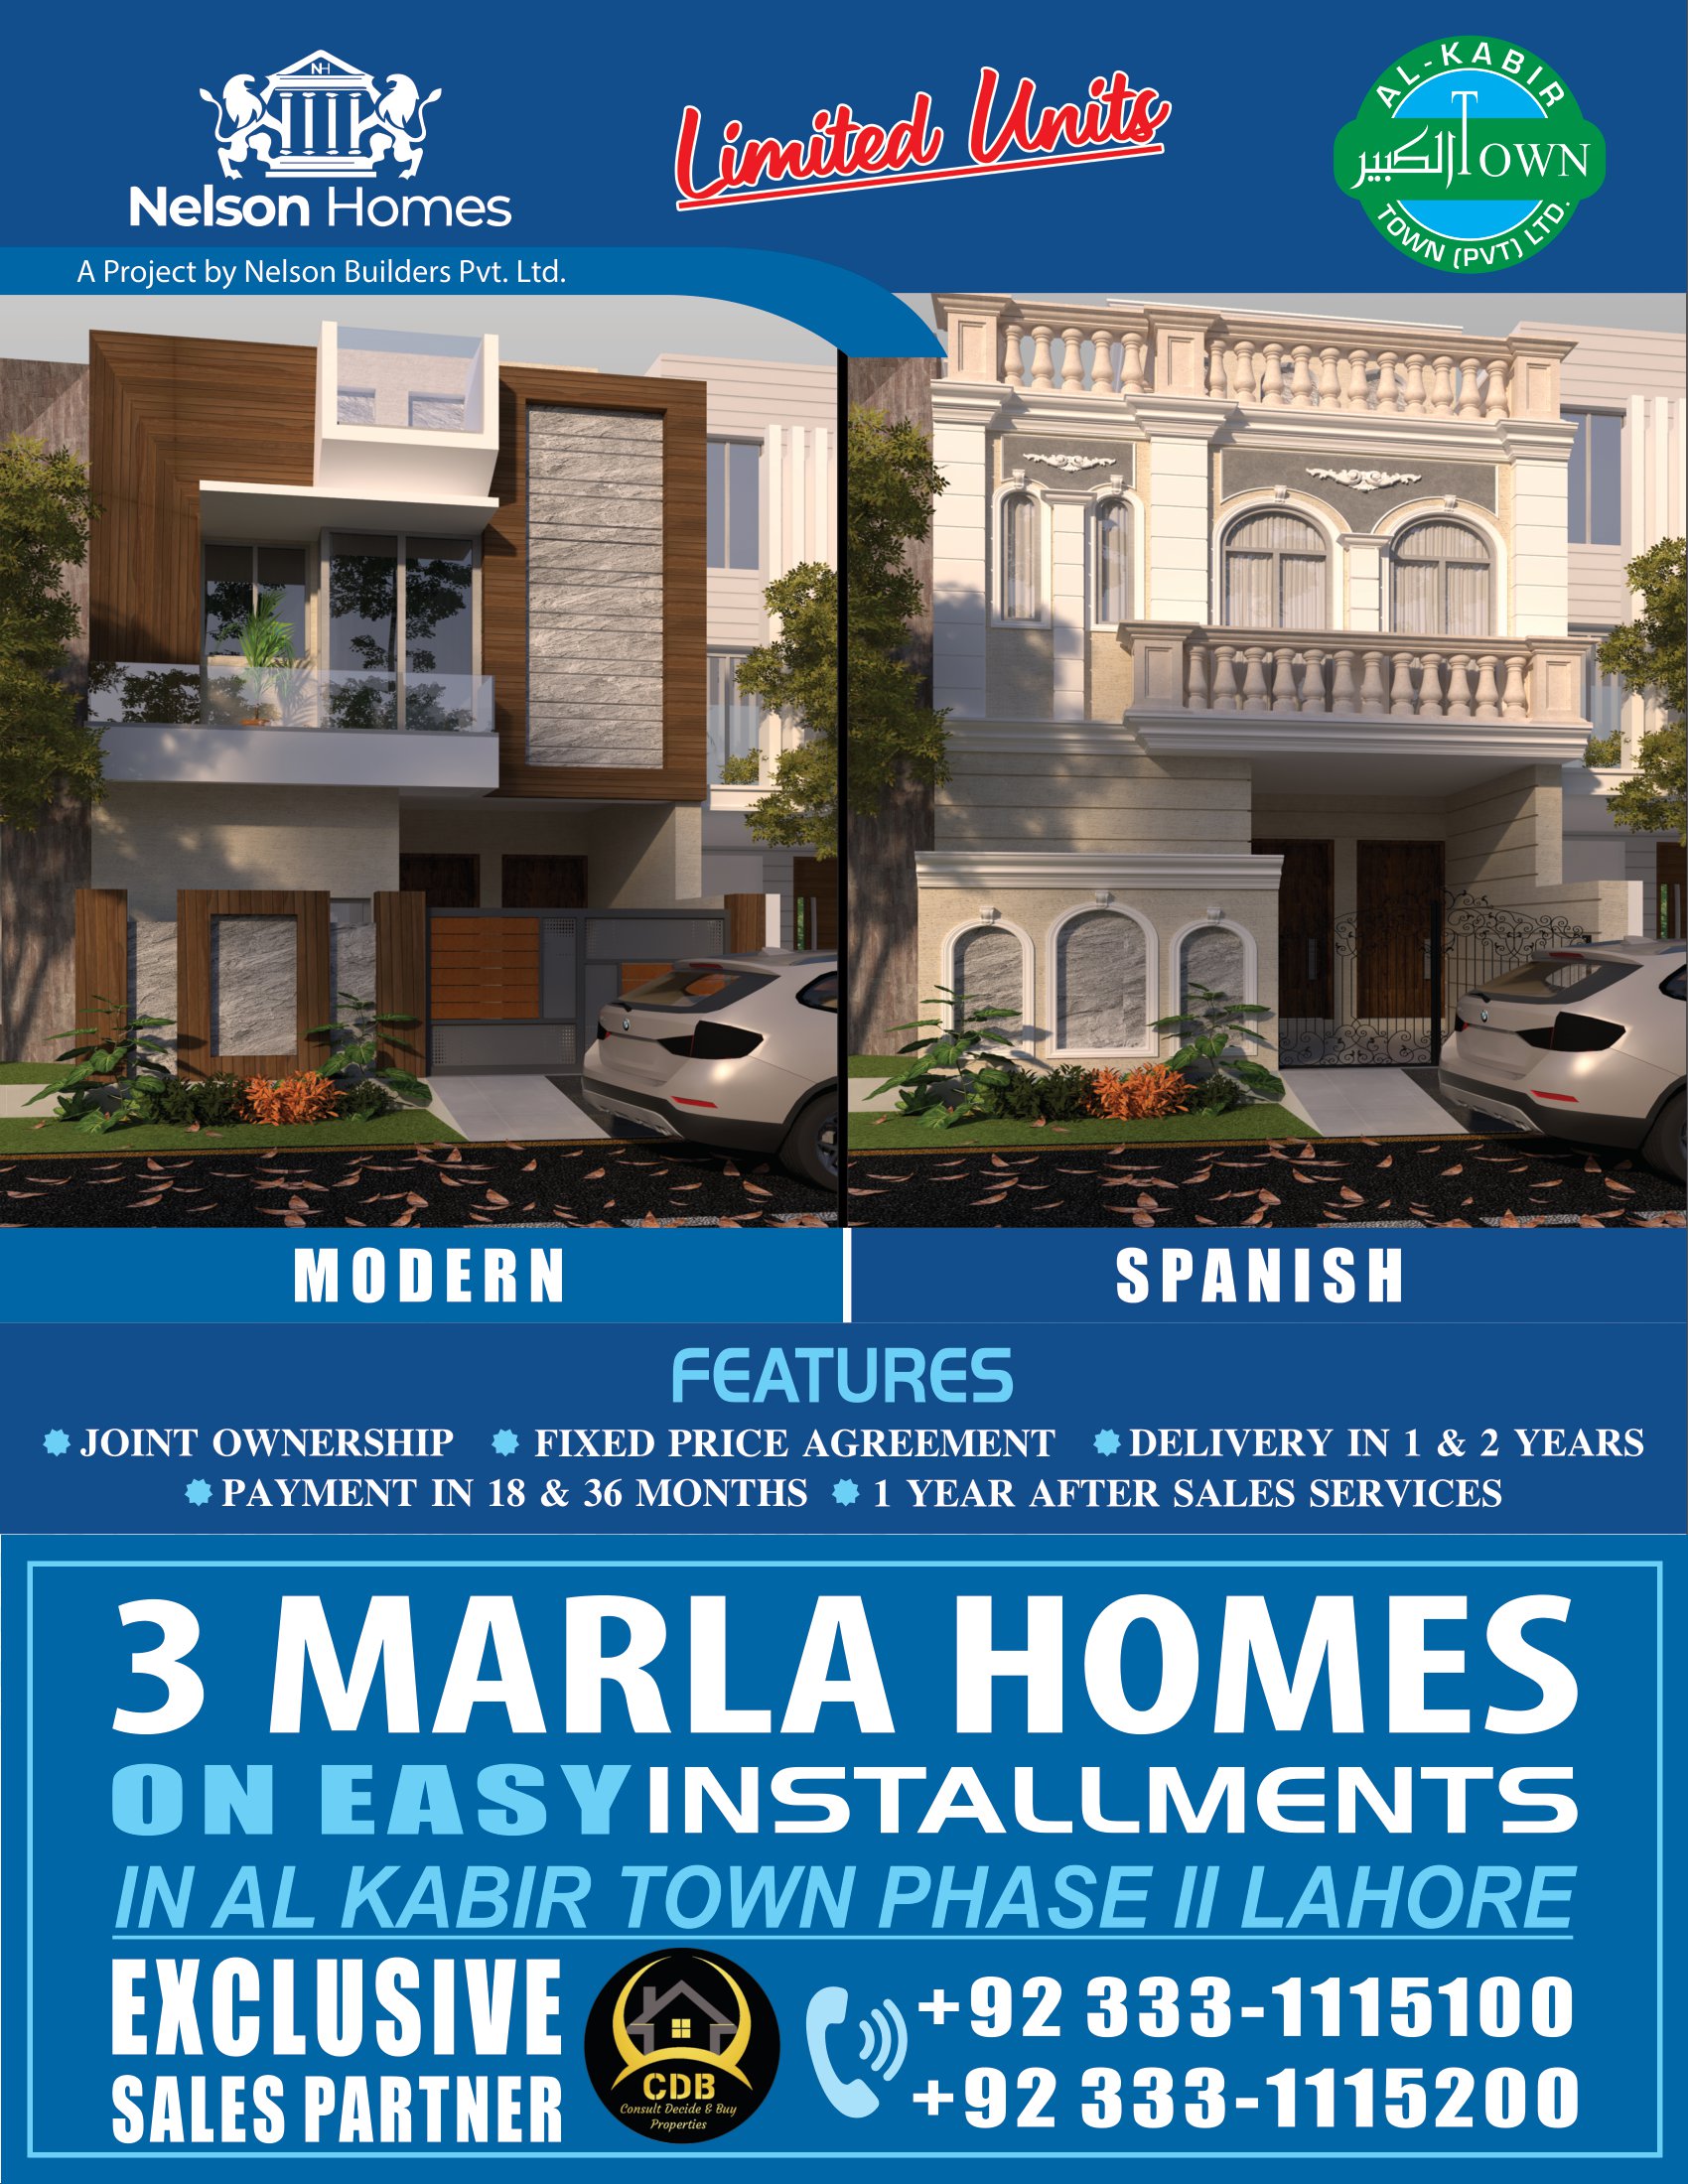 Nelson Homes Introduced 3 Marla Double-Story Homes in AL-Kabir Town Phase 2